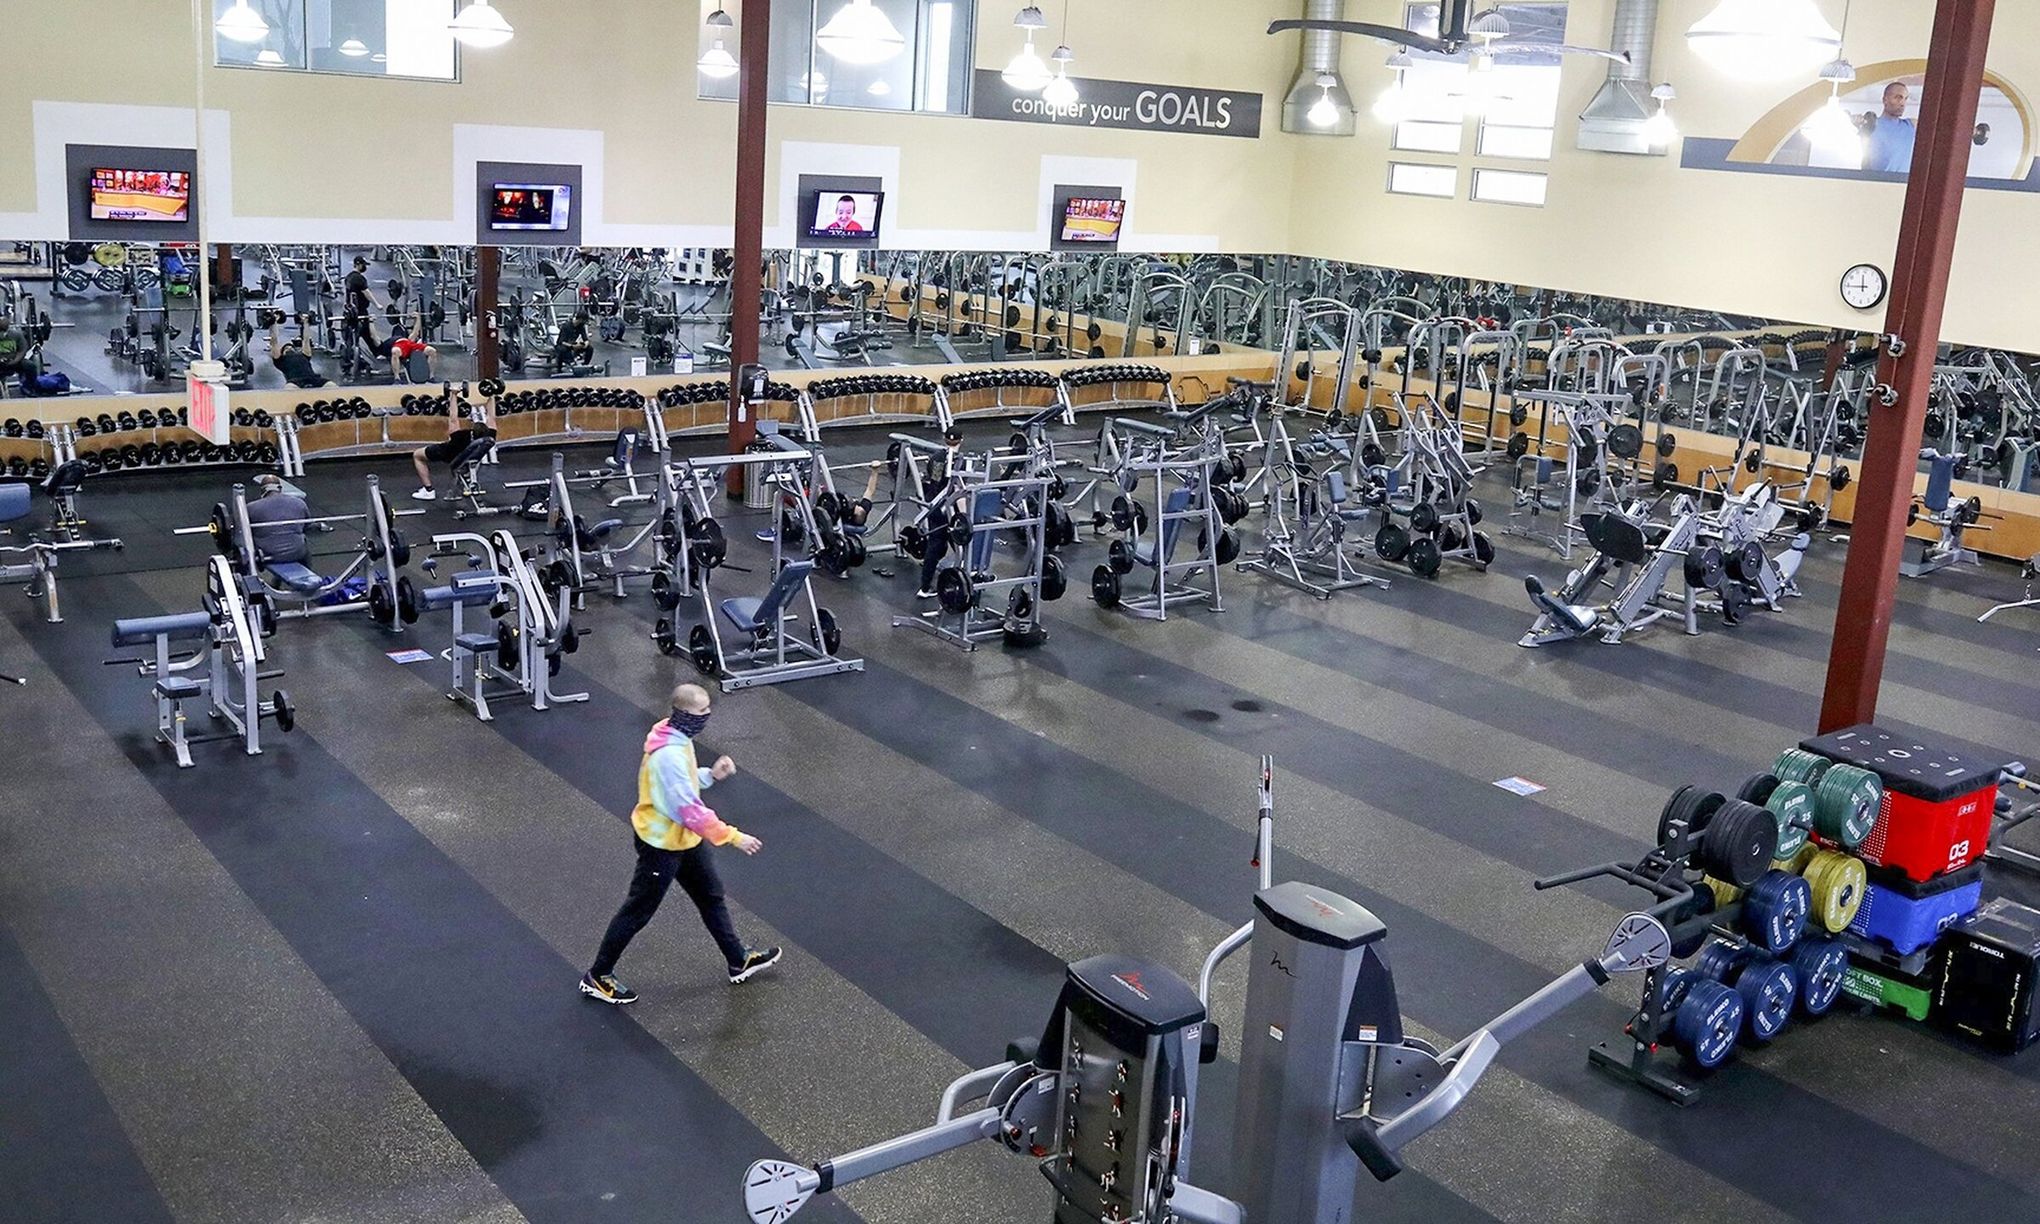 Seattle among U.S. cities with biggest drops in gym memberships